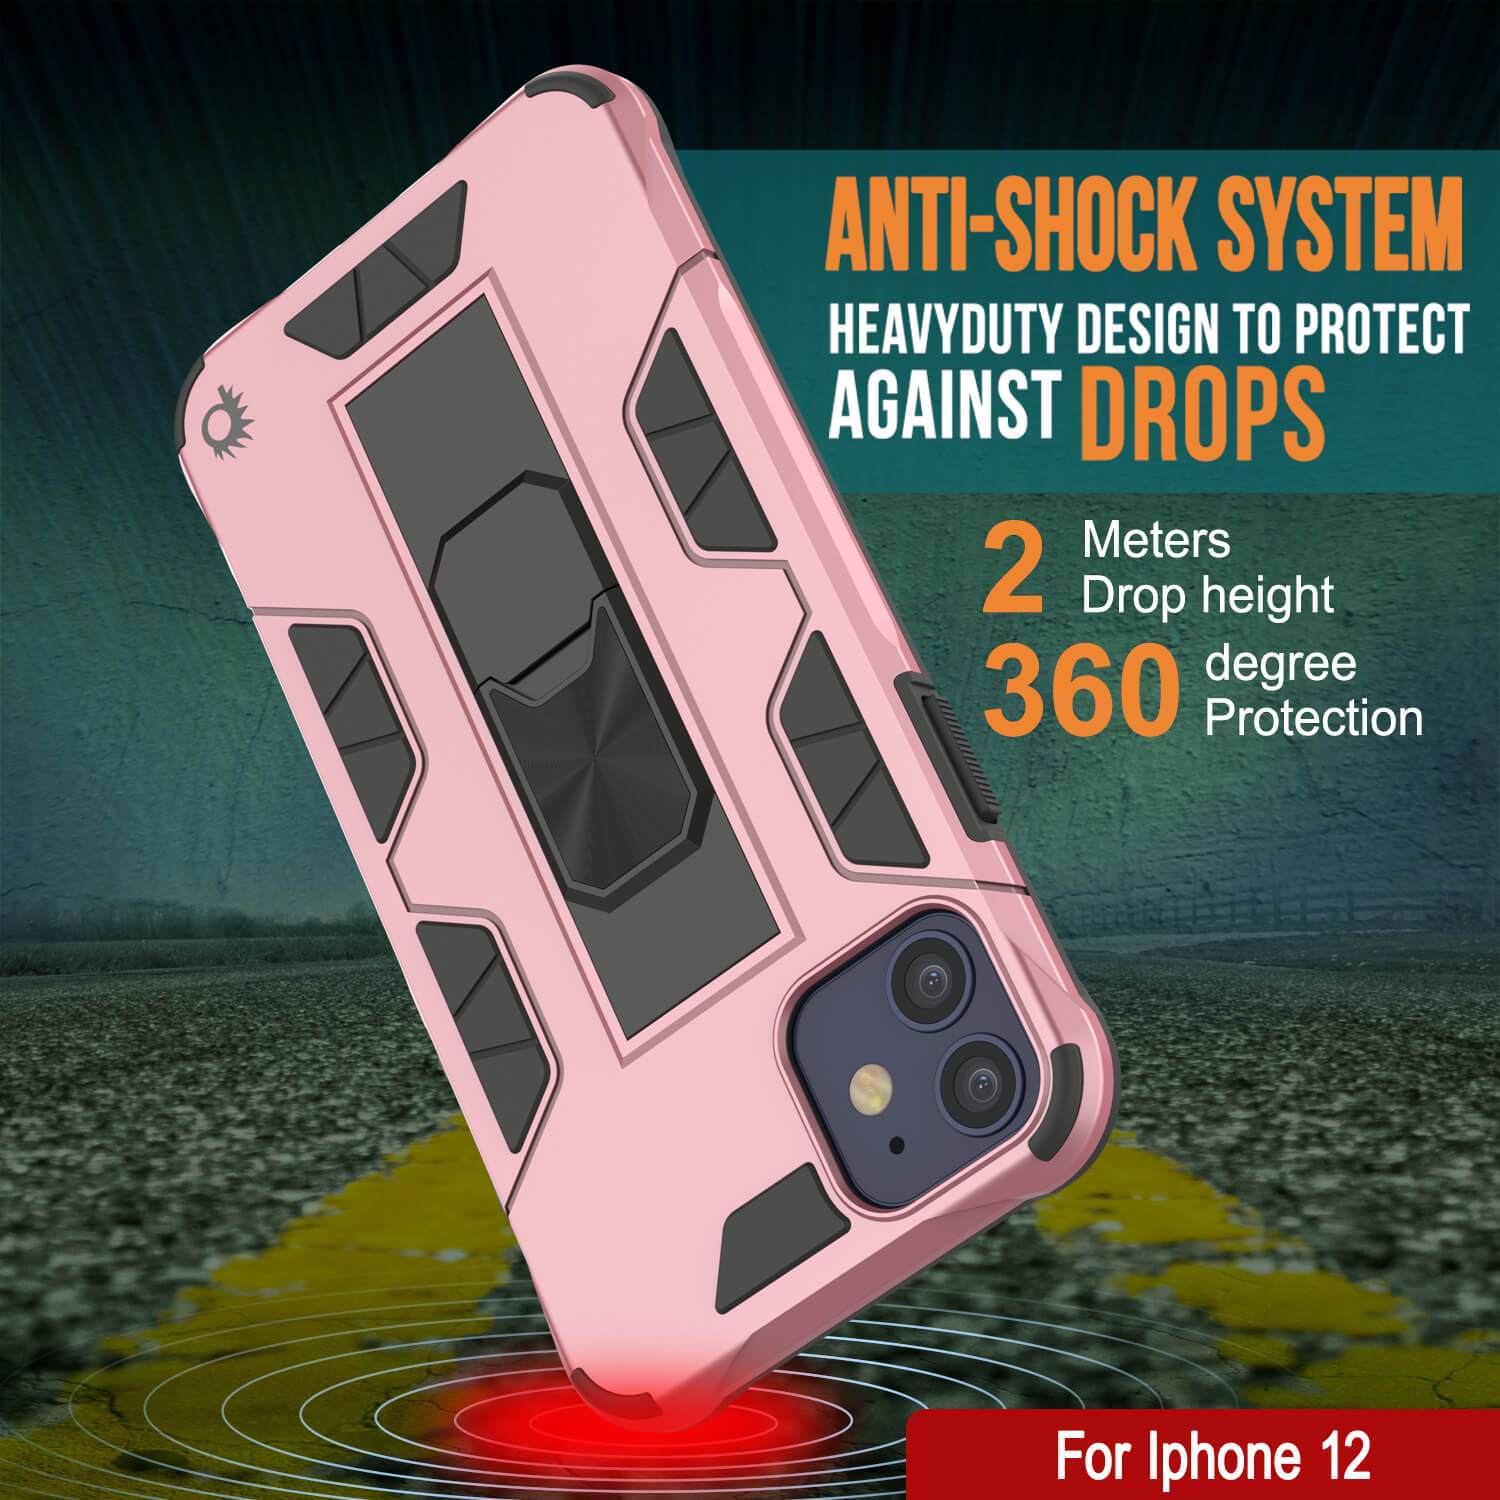 Punkcase iPhone 12 Case [ArmorShield Series] Military Style Protective Dual Layer Case Rose-Gold